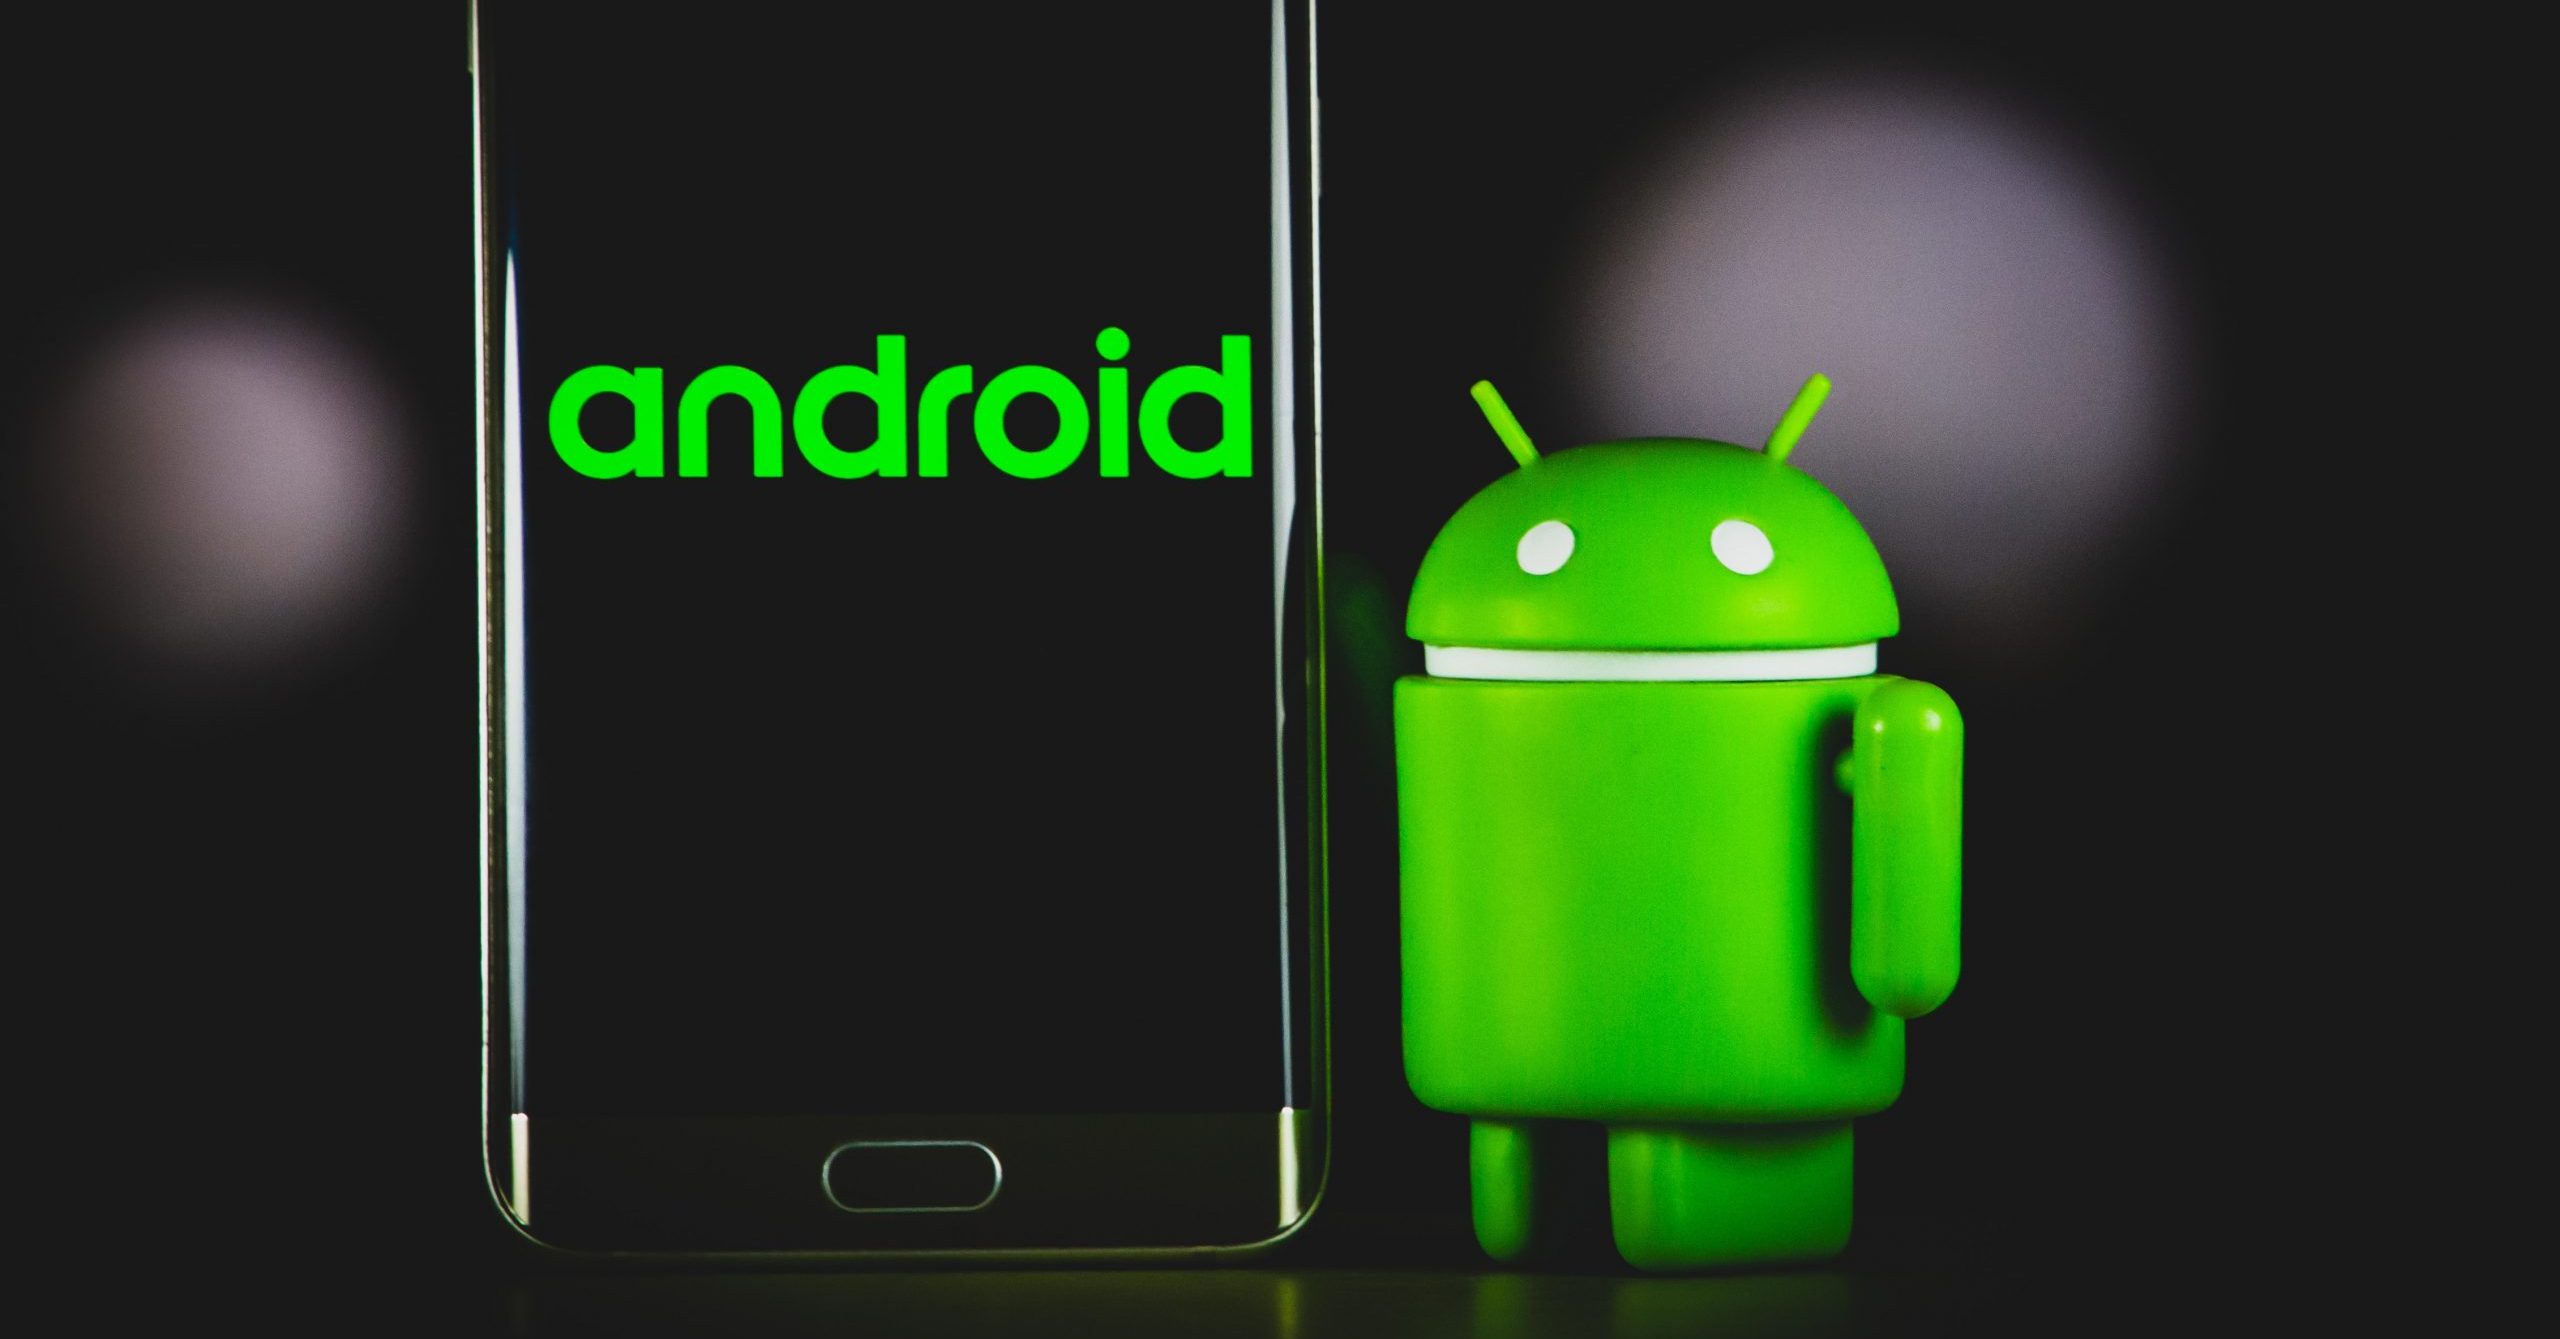 Android Police: The boot-loop: My smartphone restarts over and over, what do I do now?